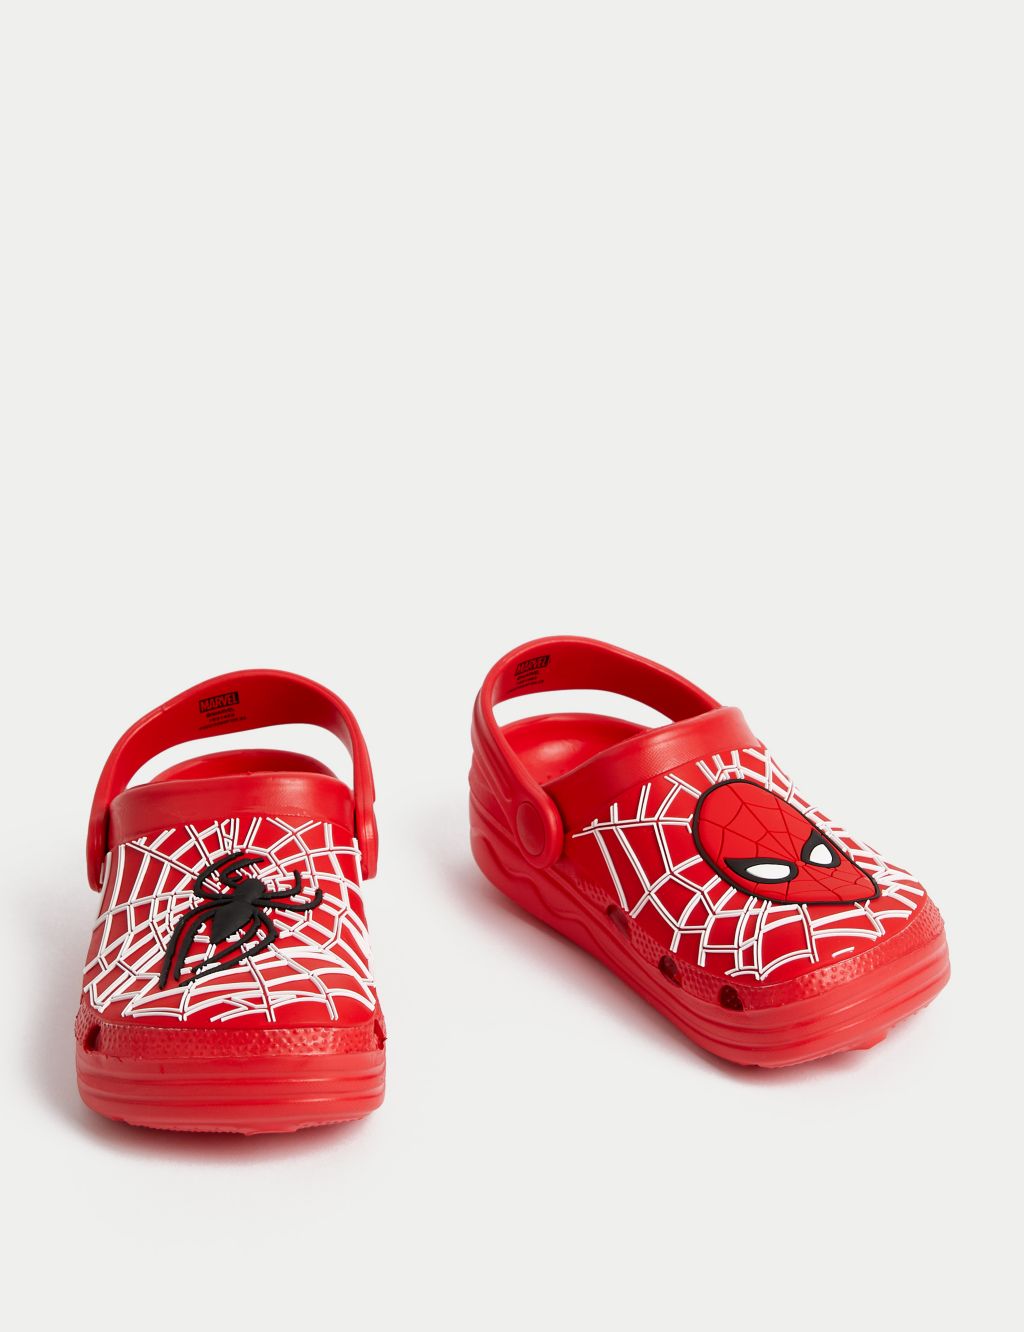 Kids' Spider-Man™ Slip-on Clogs (4 Small - 13 Small) image 2